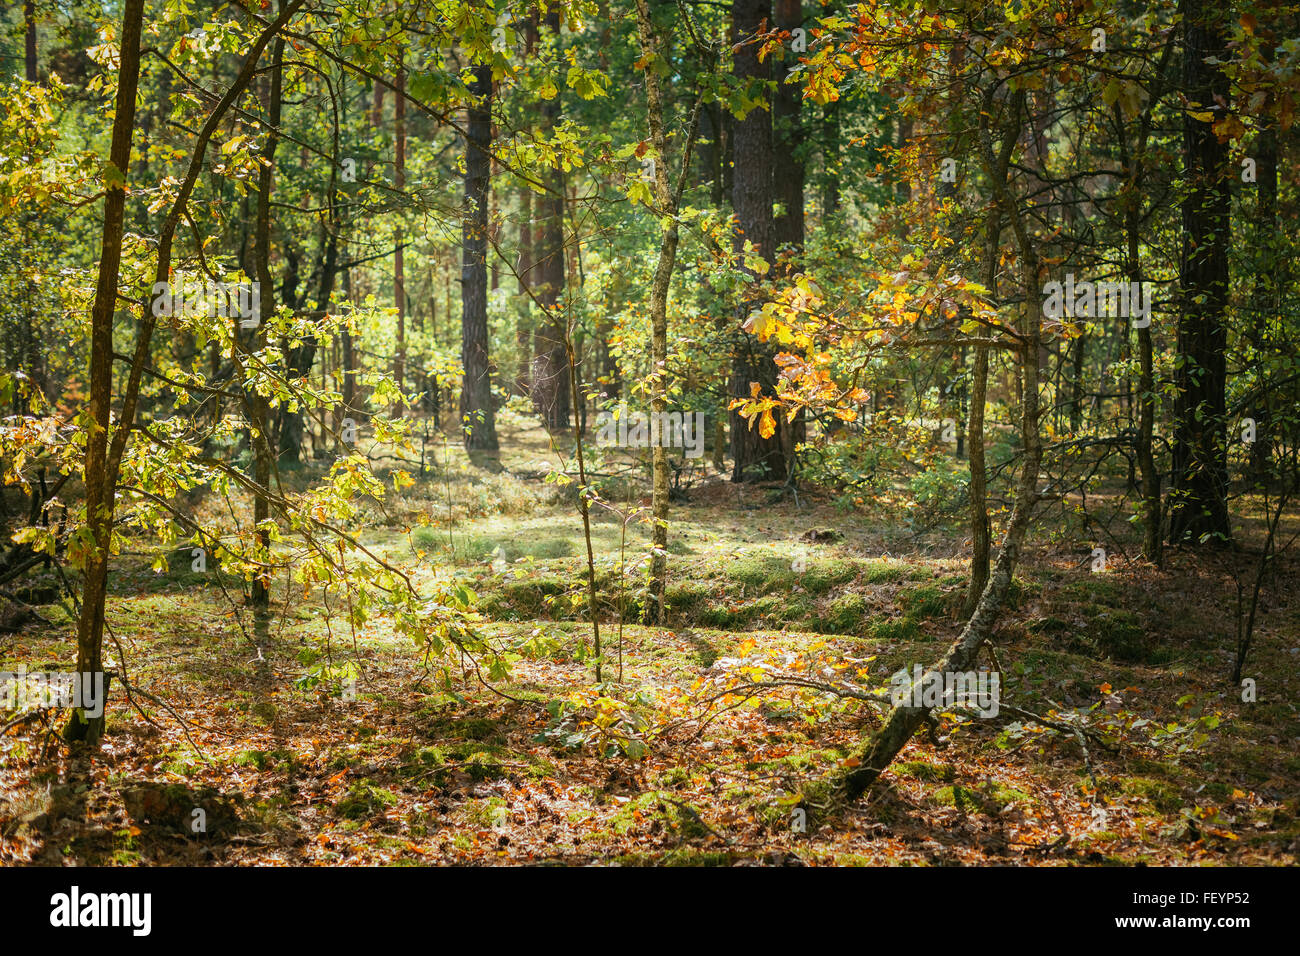 Old World War Trenches In Forest Since Second World War In Belarus Stock Photo